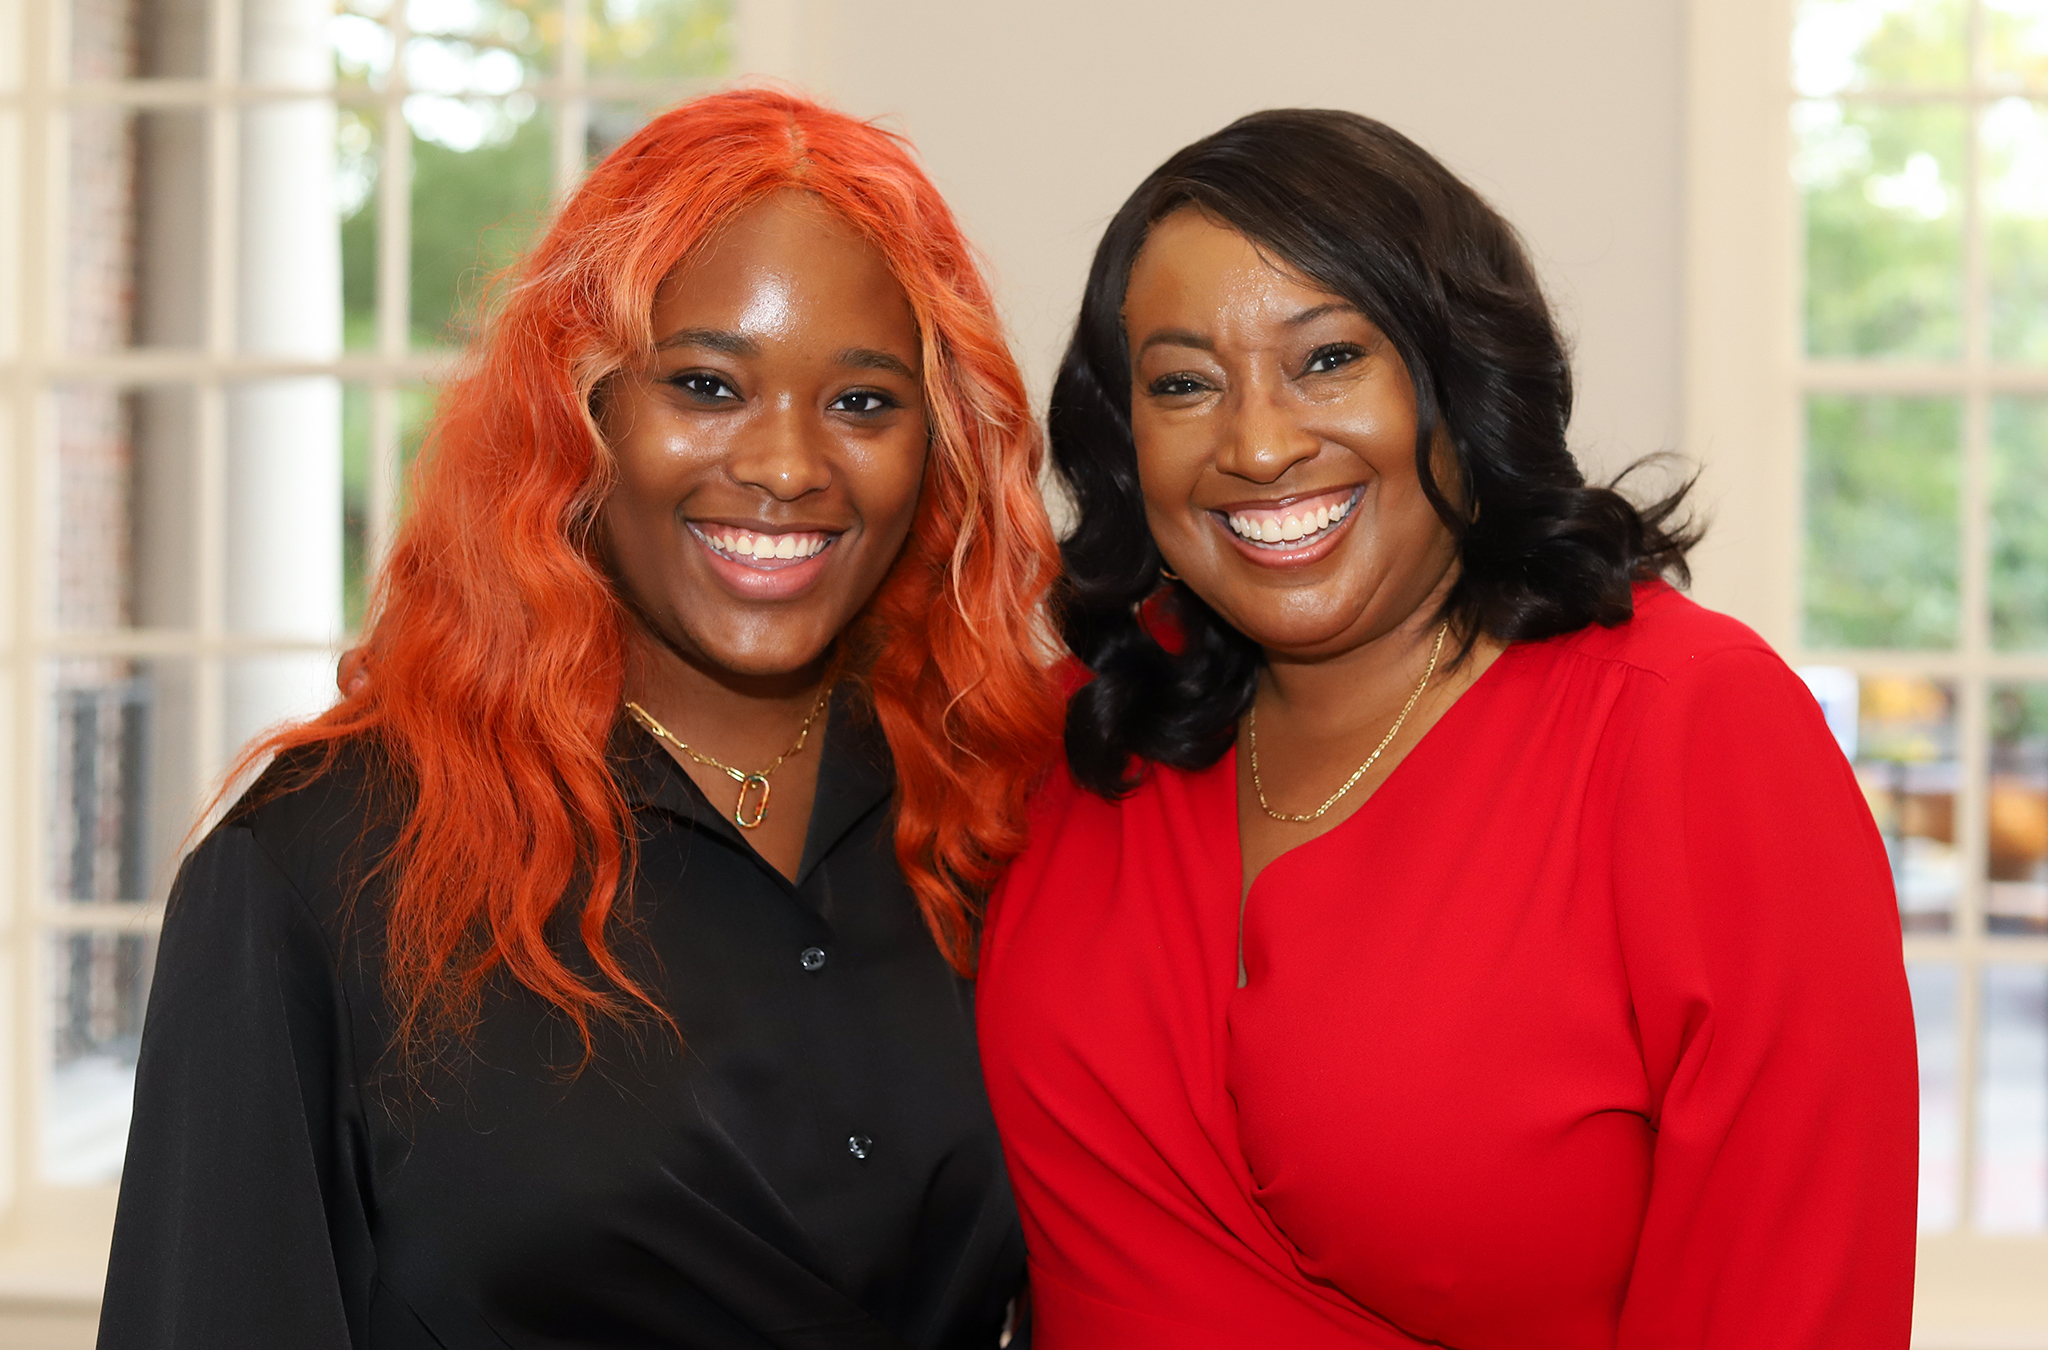 Janelle Minor (left), a sophomore public policy leadership major, spends time with her mother, Ethel Scurlock, dean of the university’s Sally McDonnell Barksdale Honors College. Submitted photo